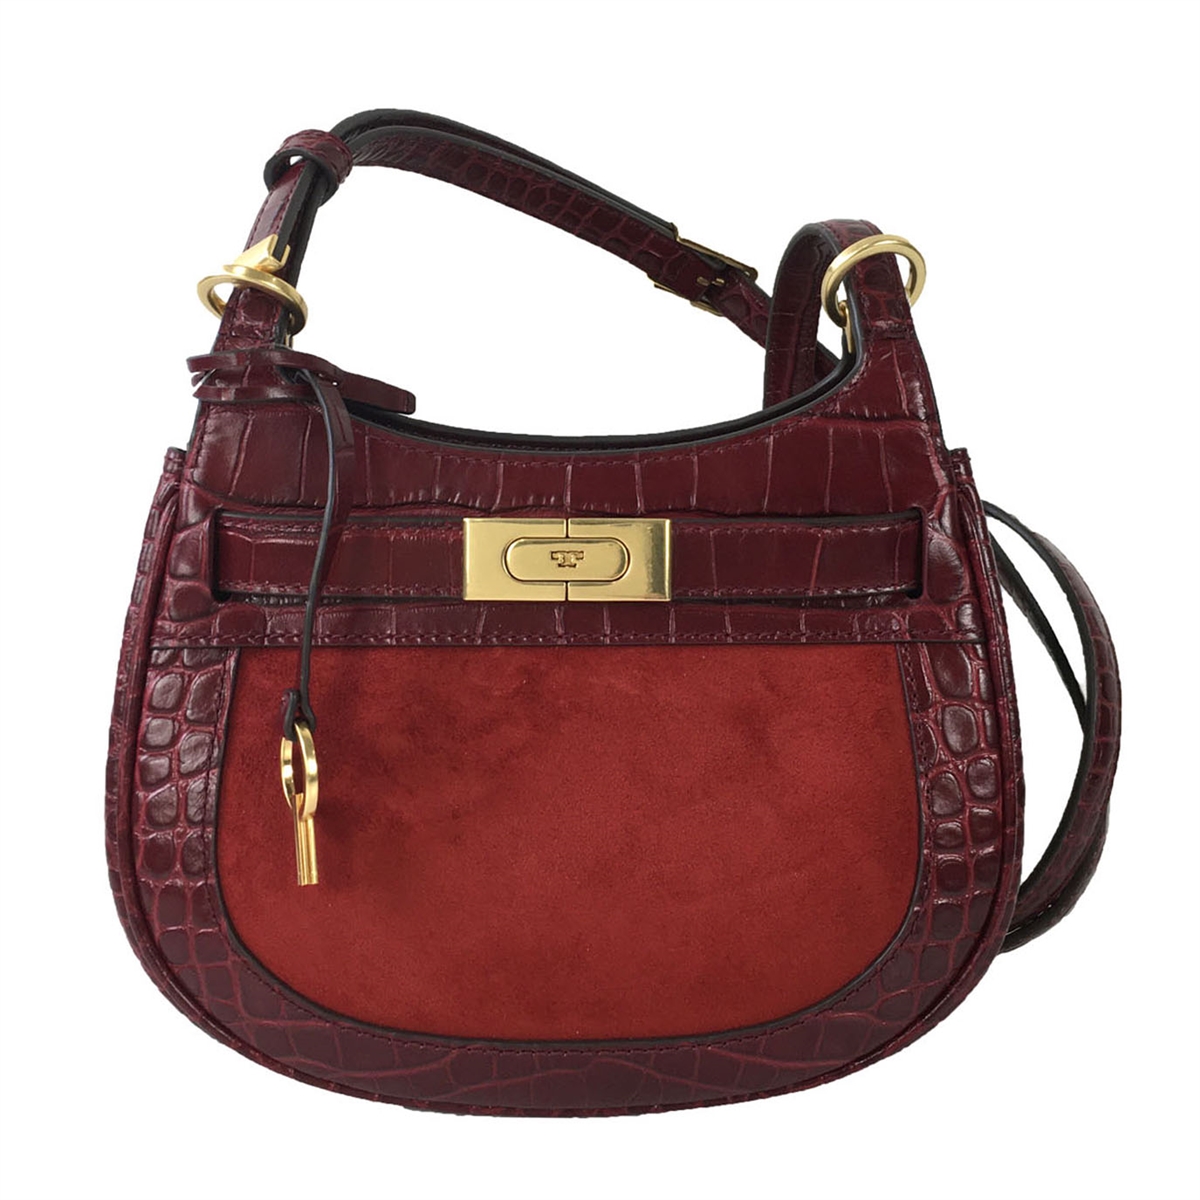 Tory Burch Lee Radziwill Small Croco Embossed Leather & Suede Saddle Bag, Roma Red